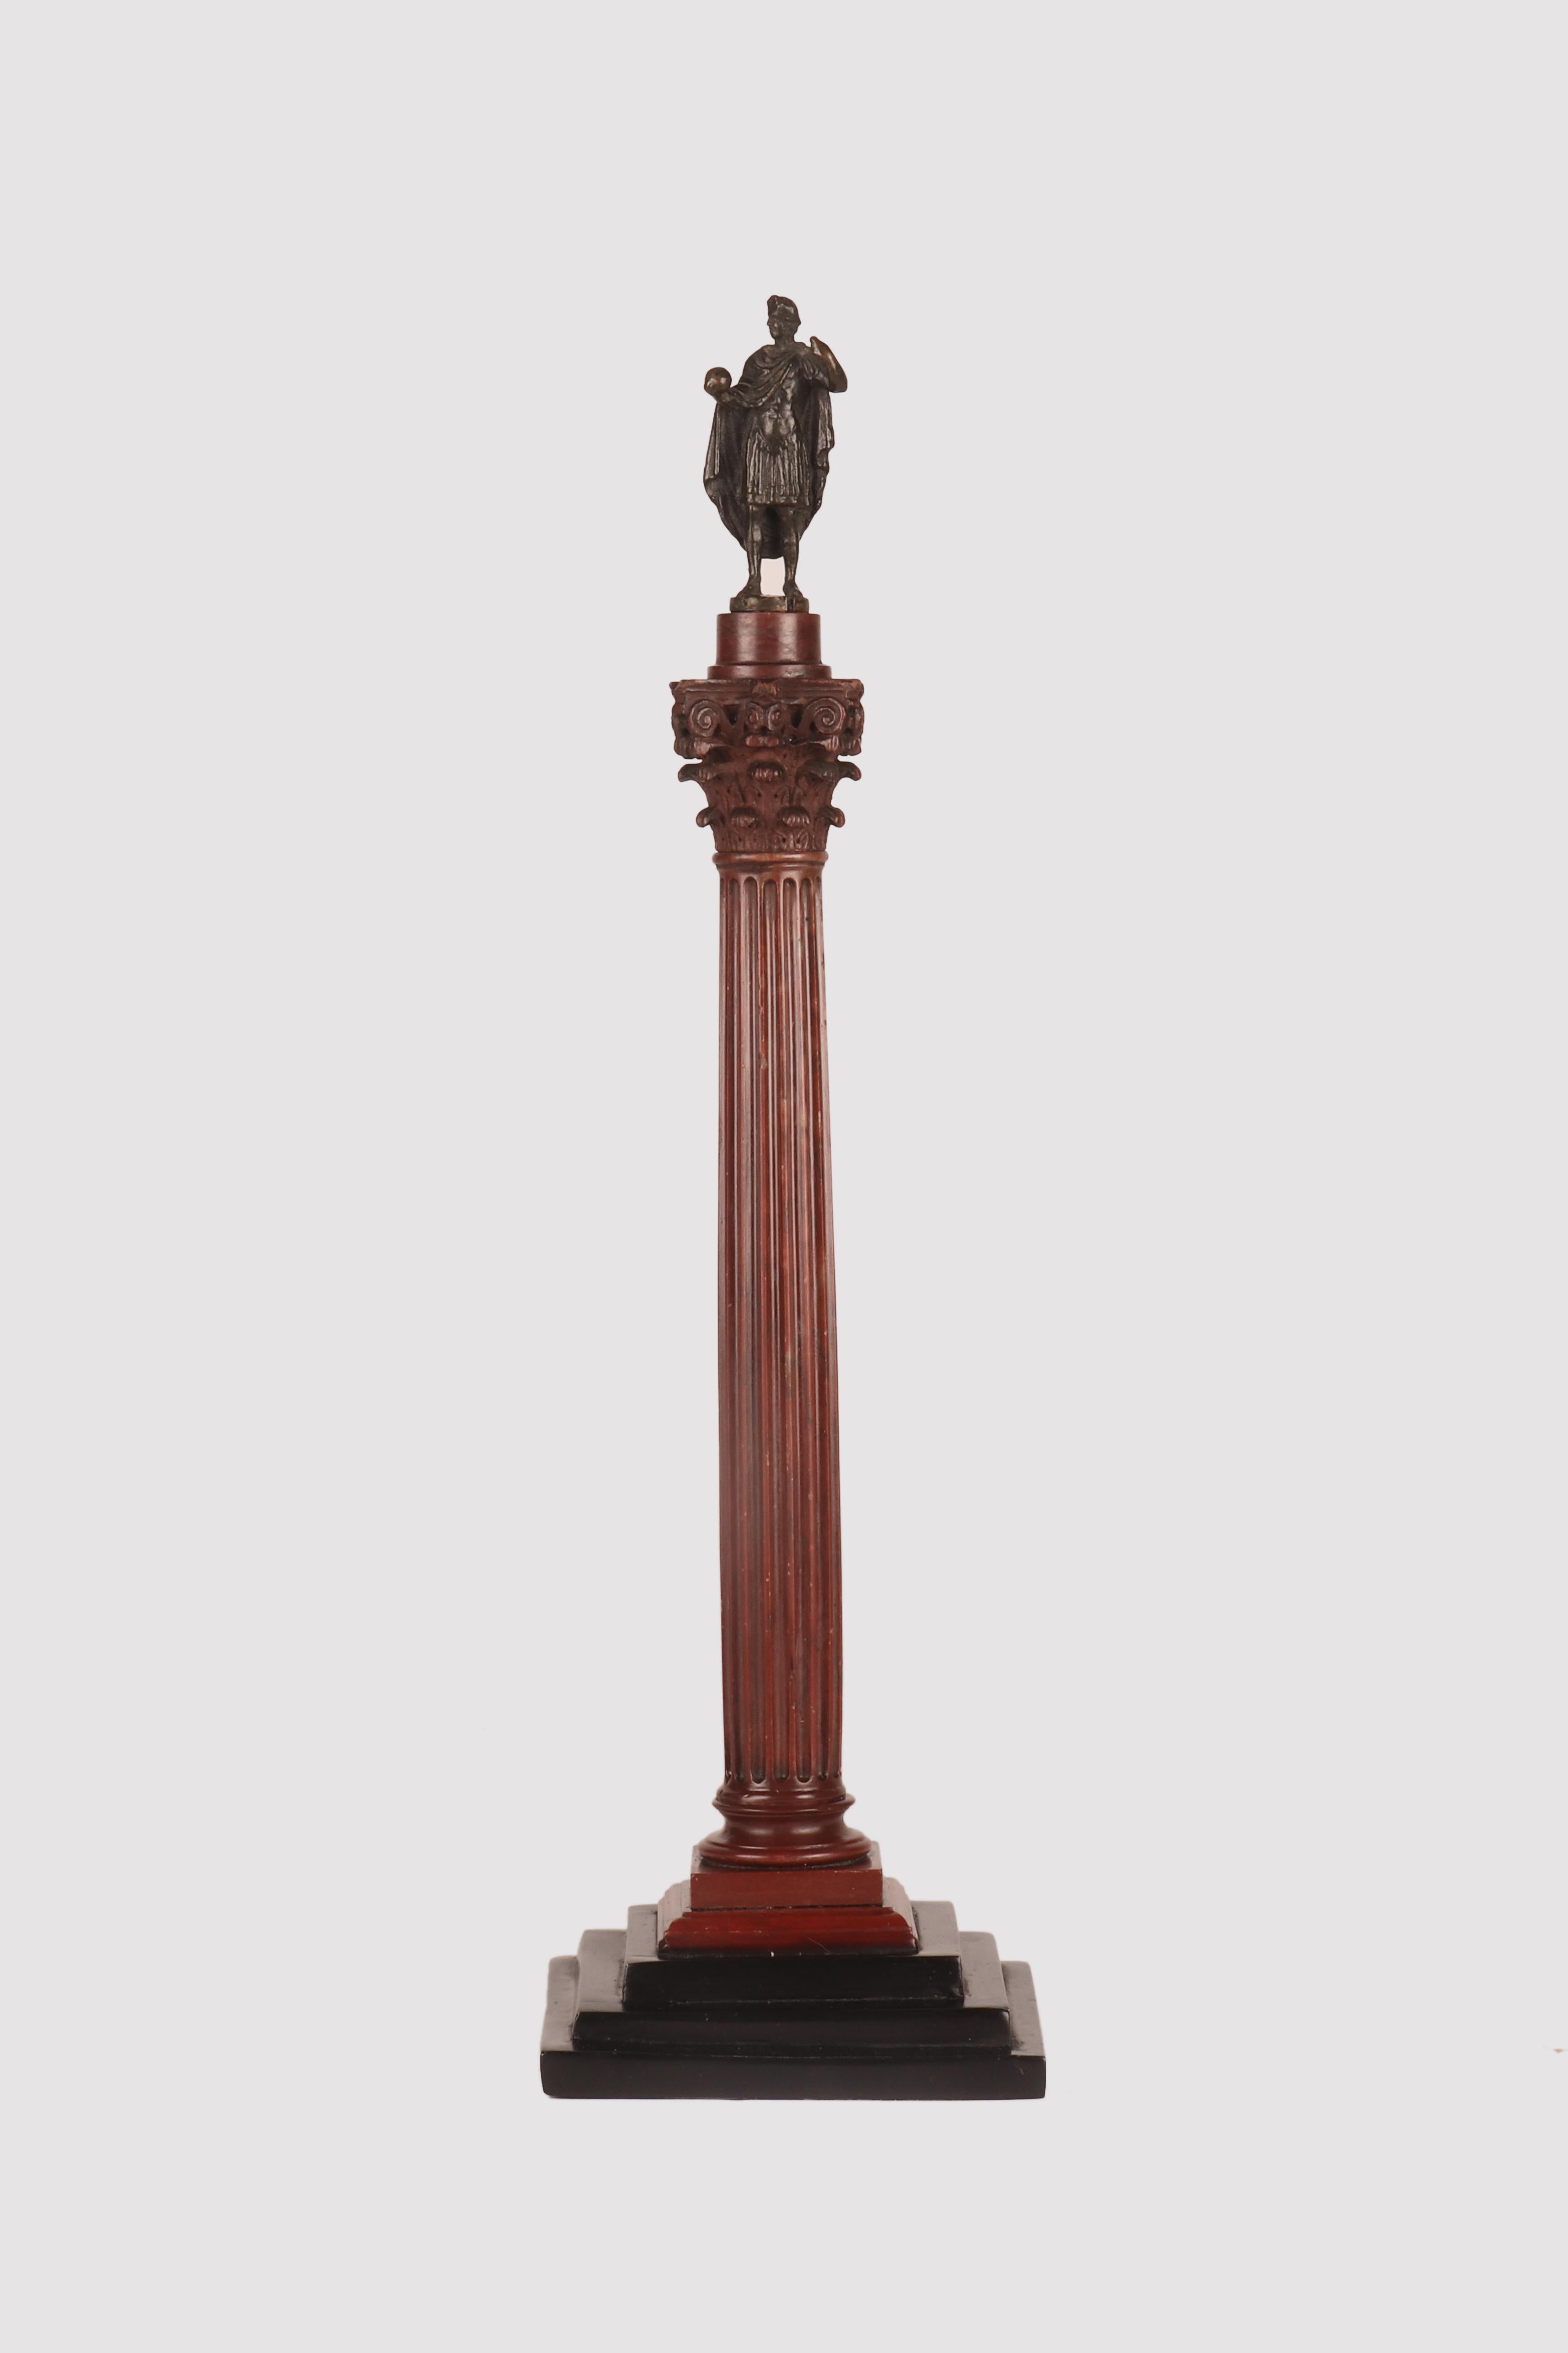 A souvenir of the Grand Tour, Rome stage. Trajan's column.
The famous monument is representative of Rome, Caput Mundi, and the greatest empire of its time in its maximum splendor. Here the monument is represented in red marble with at the top the